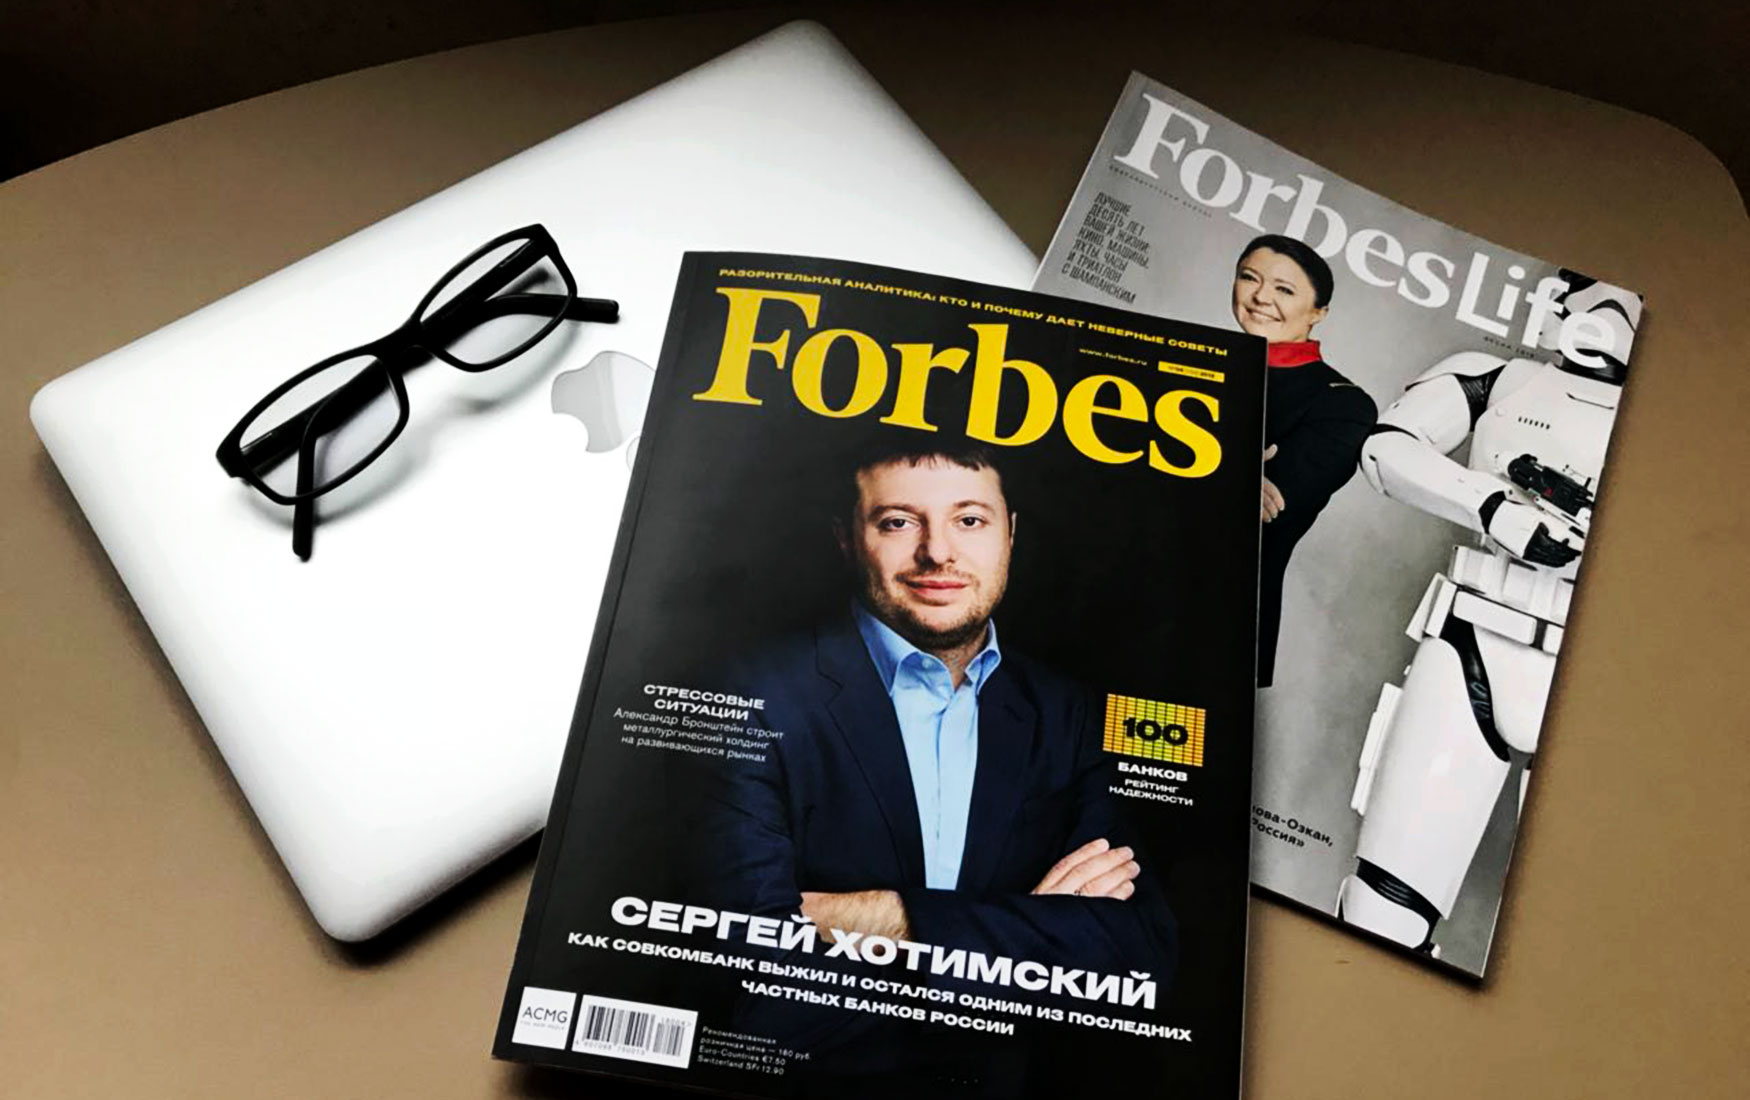   forbes 